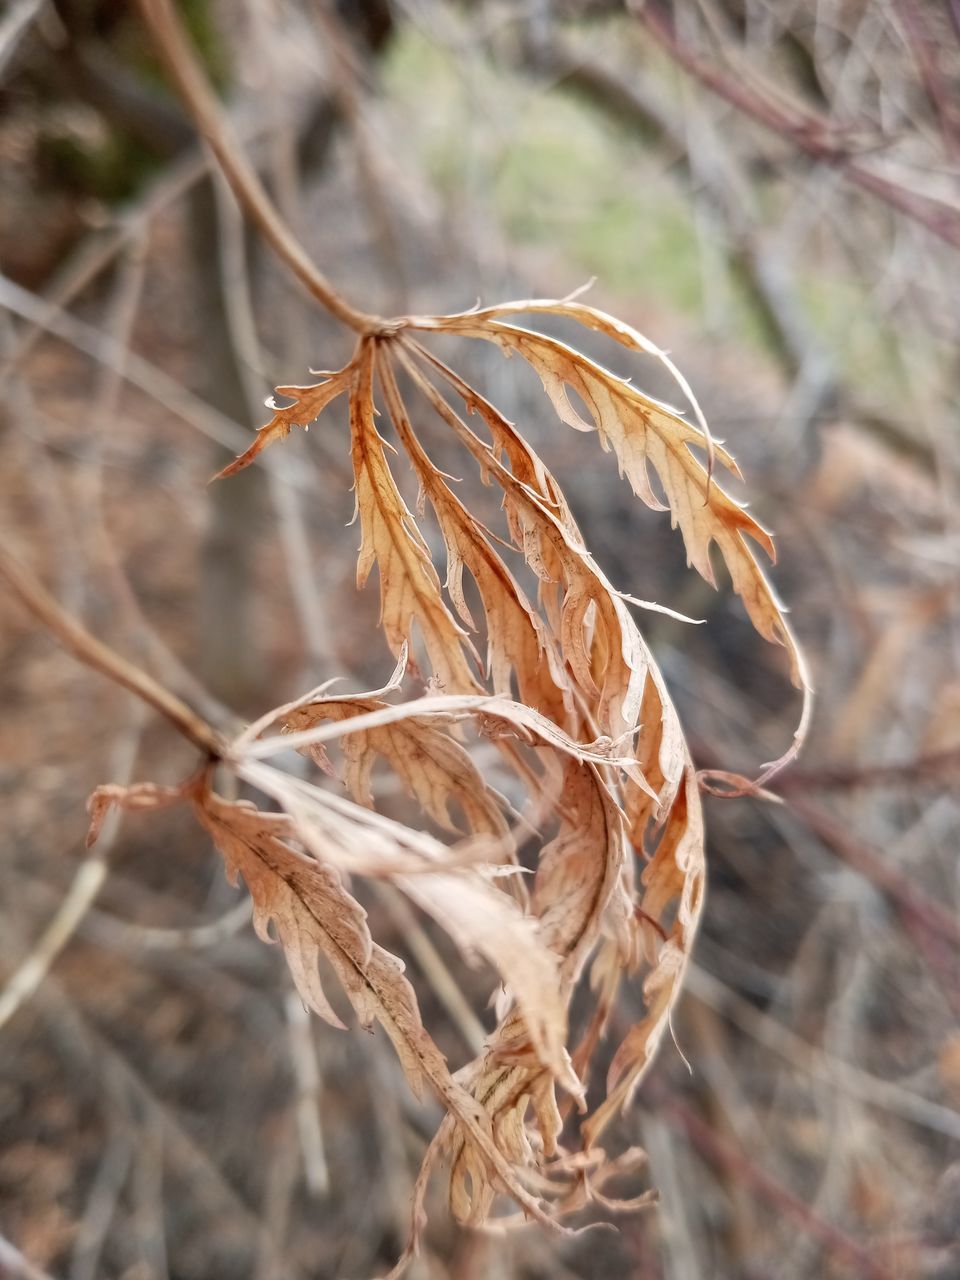 CLOSE-UP OF WILTED PLANT ON FIELD